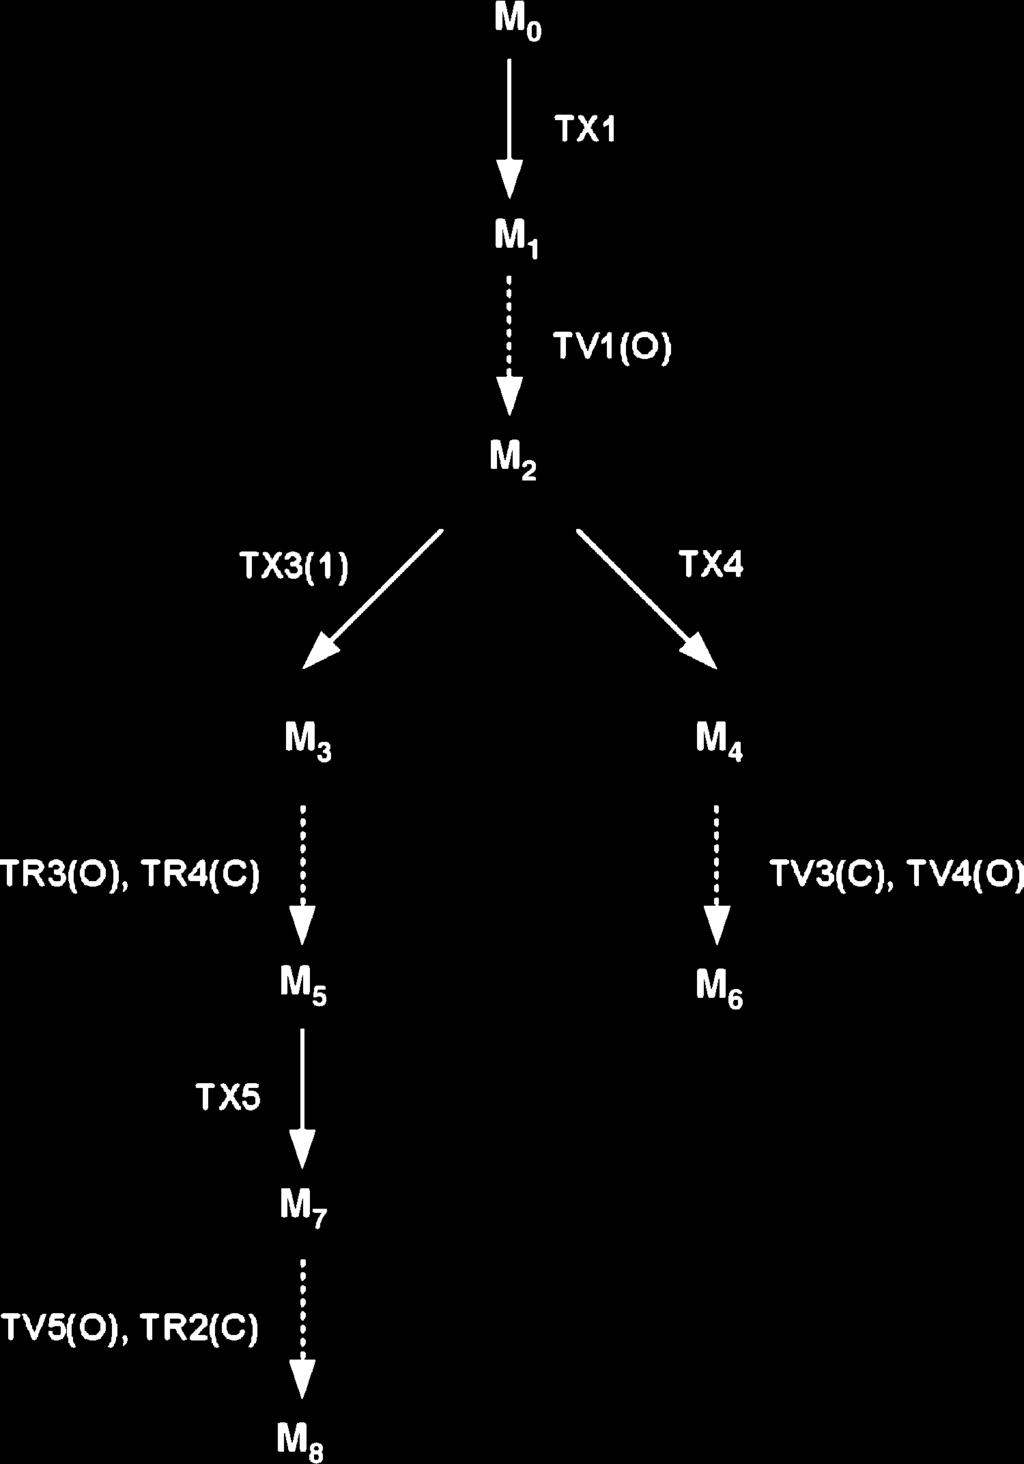 Y.-F. Wang et al. / Computers and Chemical Engineering 29 (2004) 1822 1836 1829 Fig. 9. A reachability tree of the Petri net in Fig. 8. on the selected route.